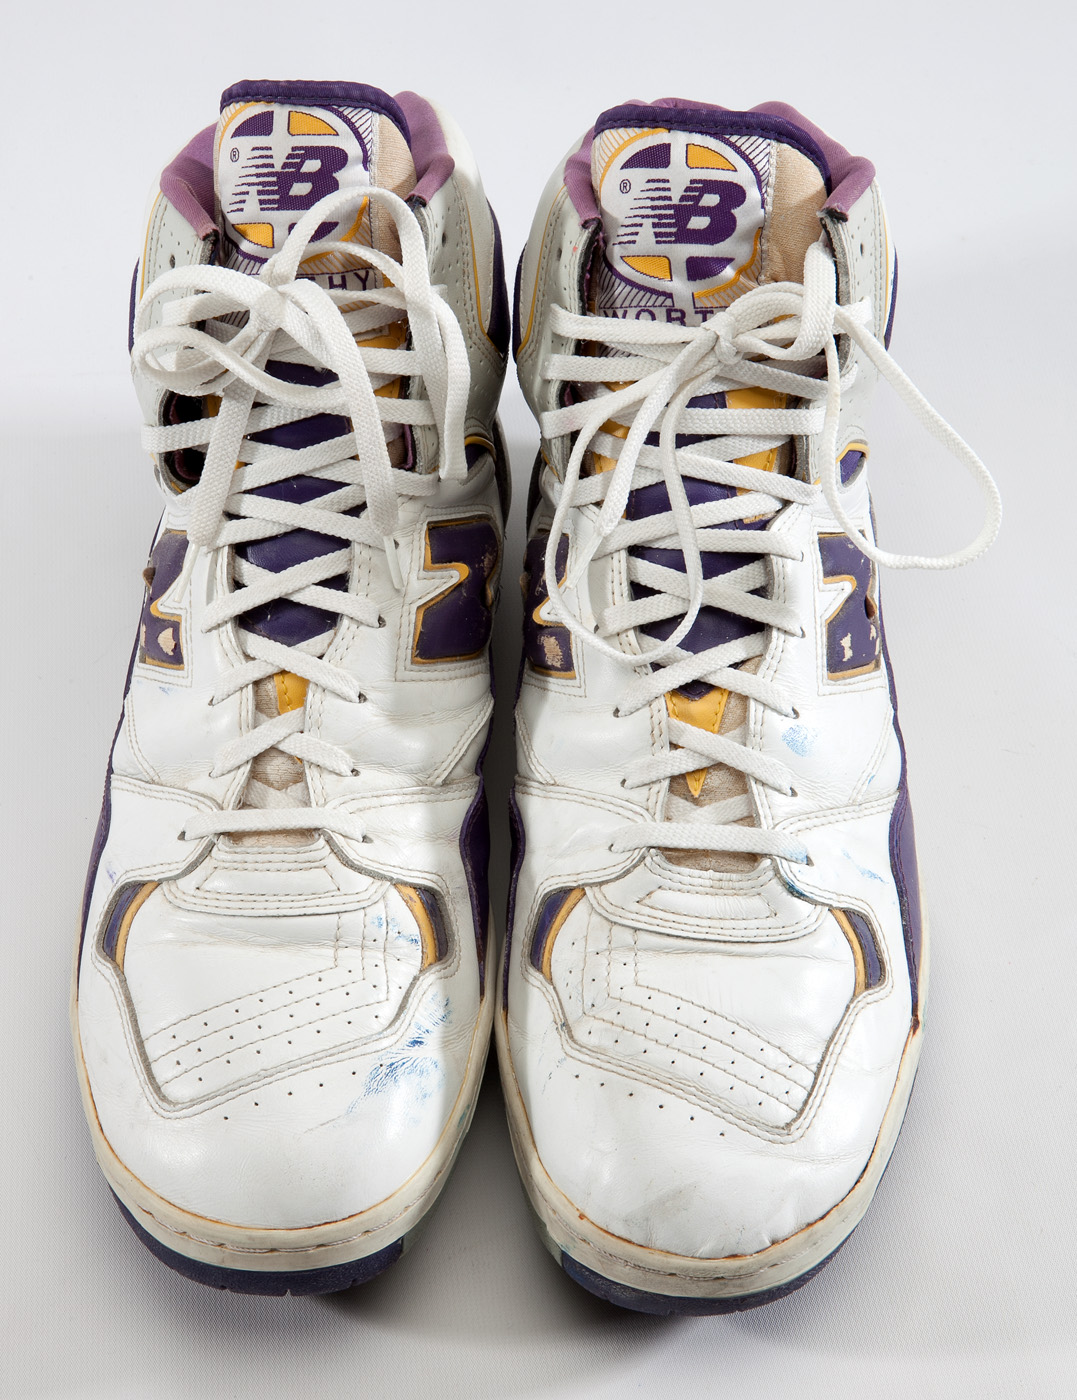 James Worthy — The Deffest®. A vintage and retro sneaker blog